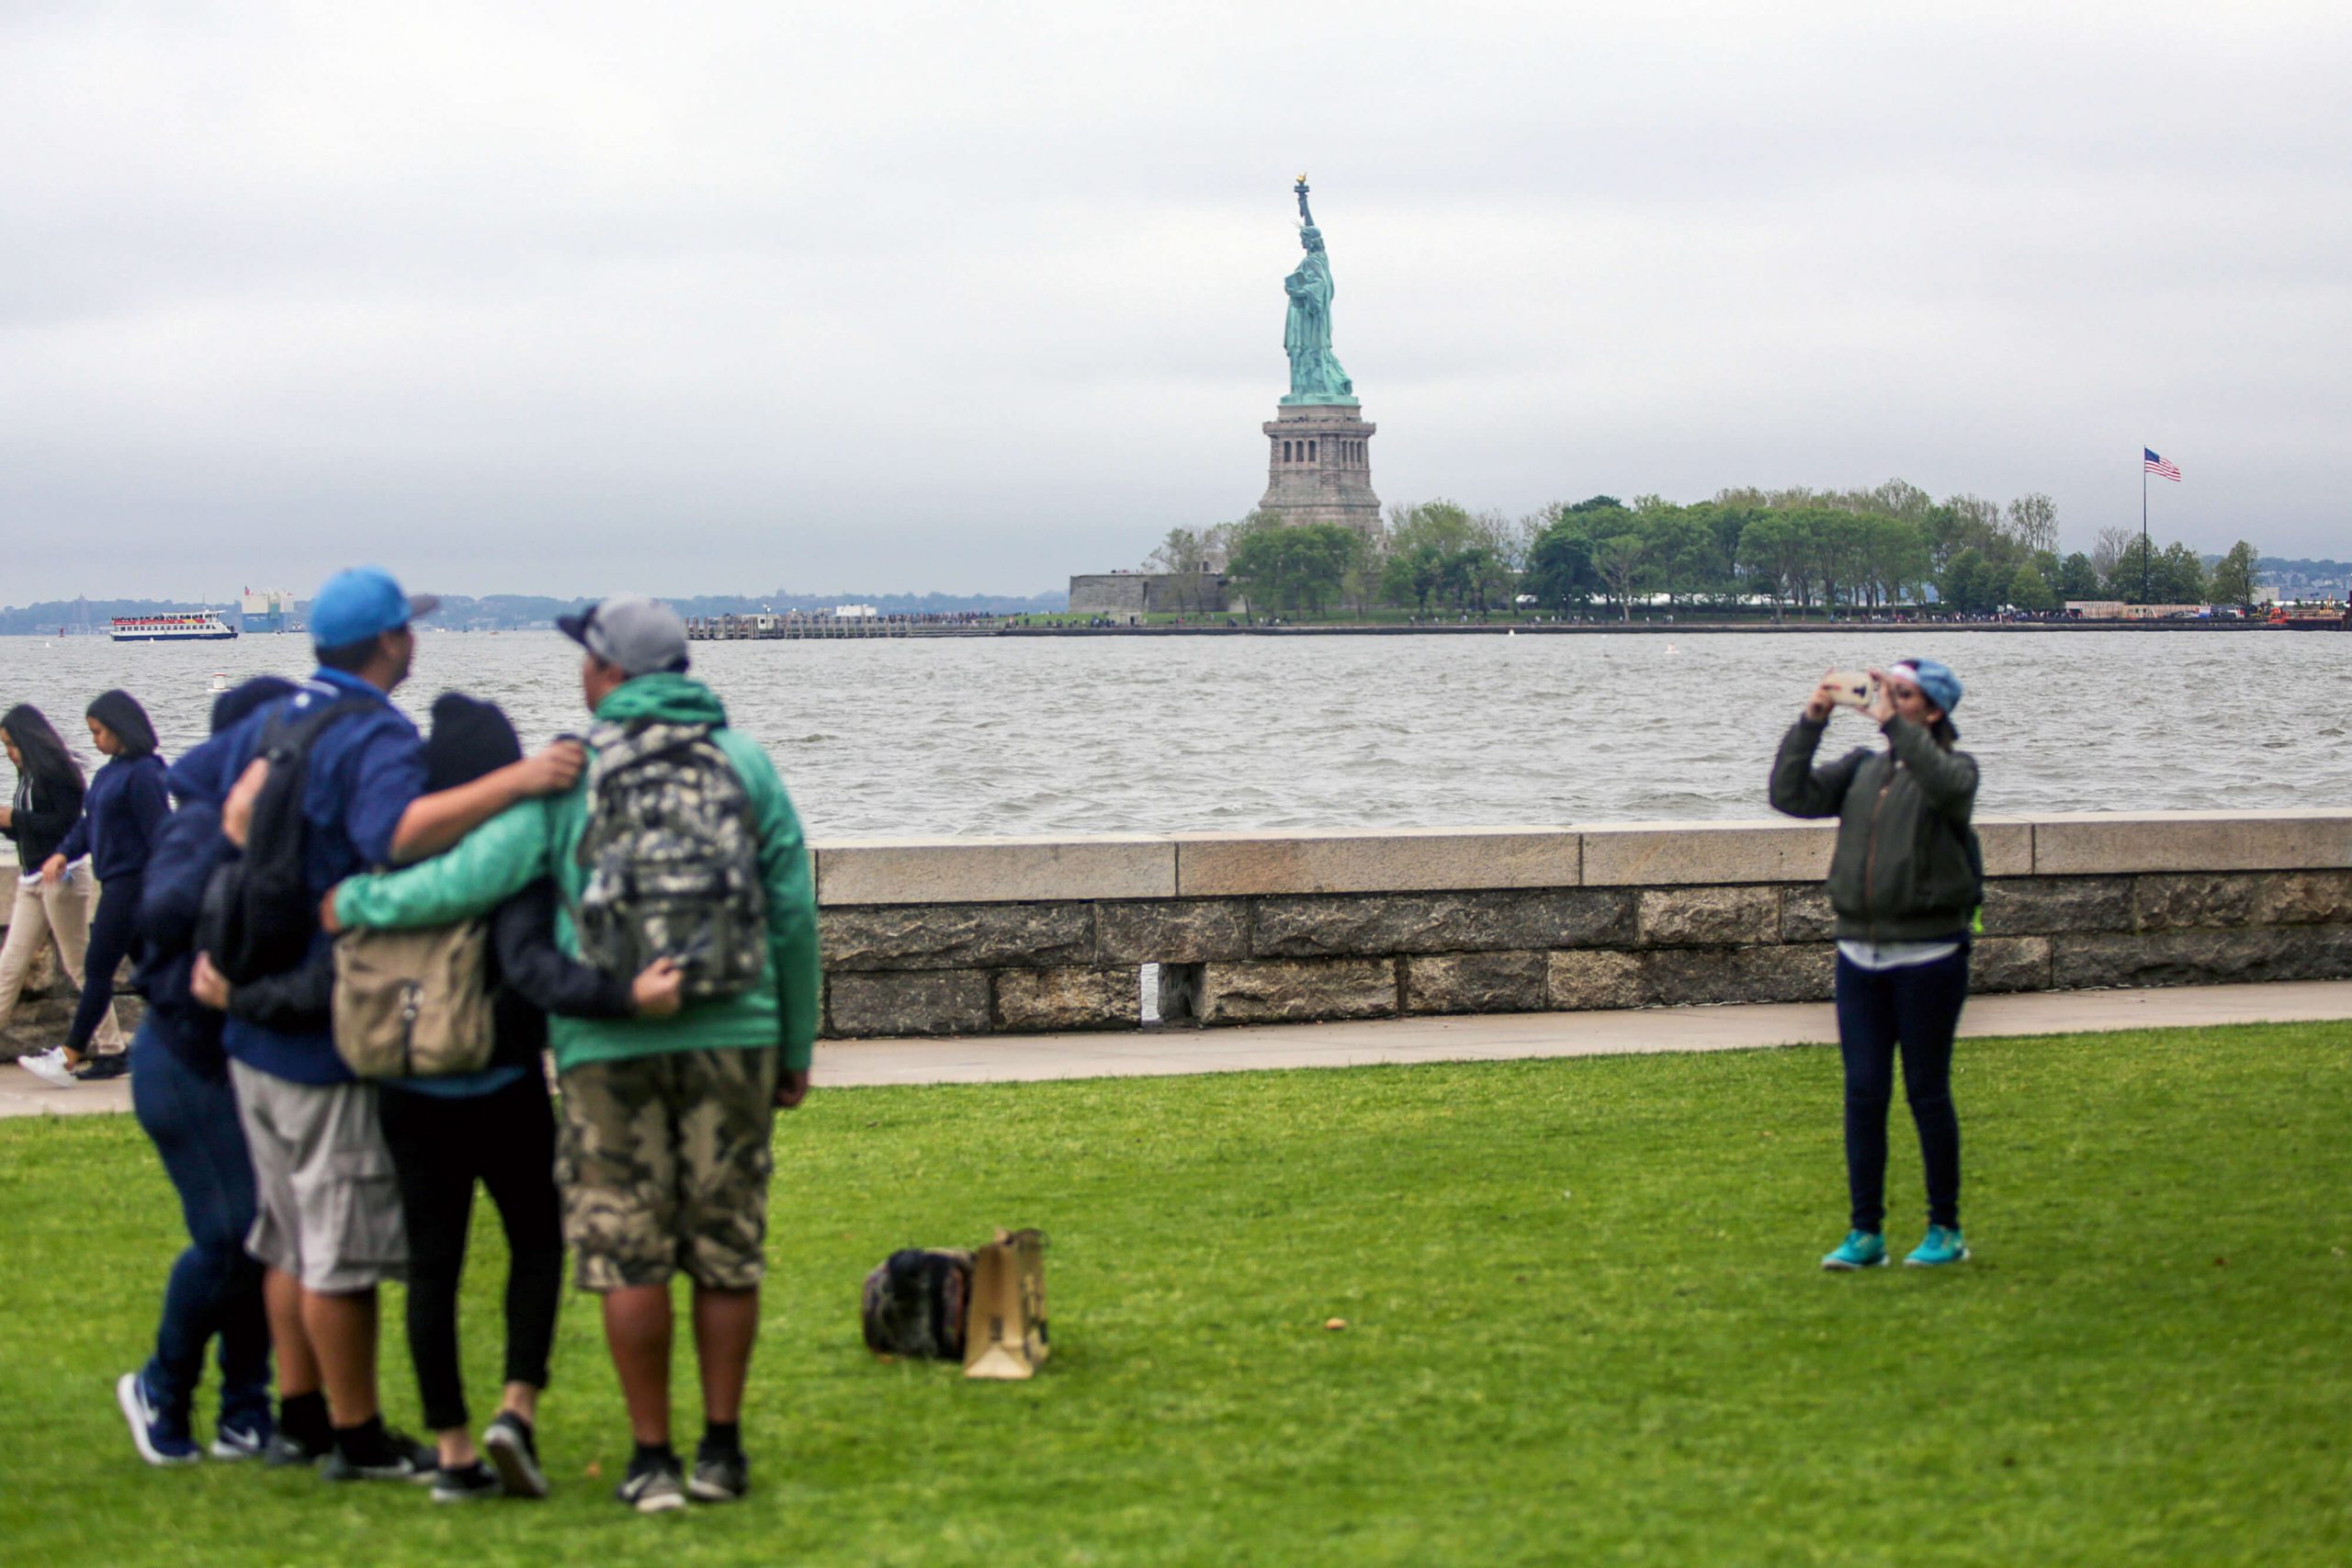 photo with statue of liberty in background